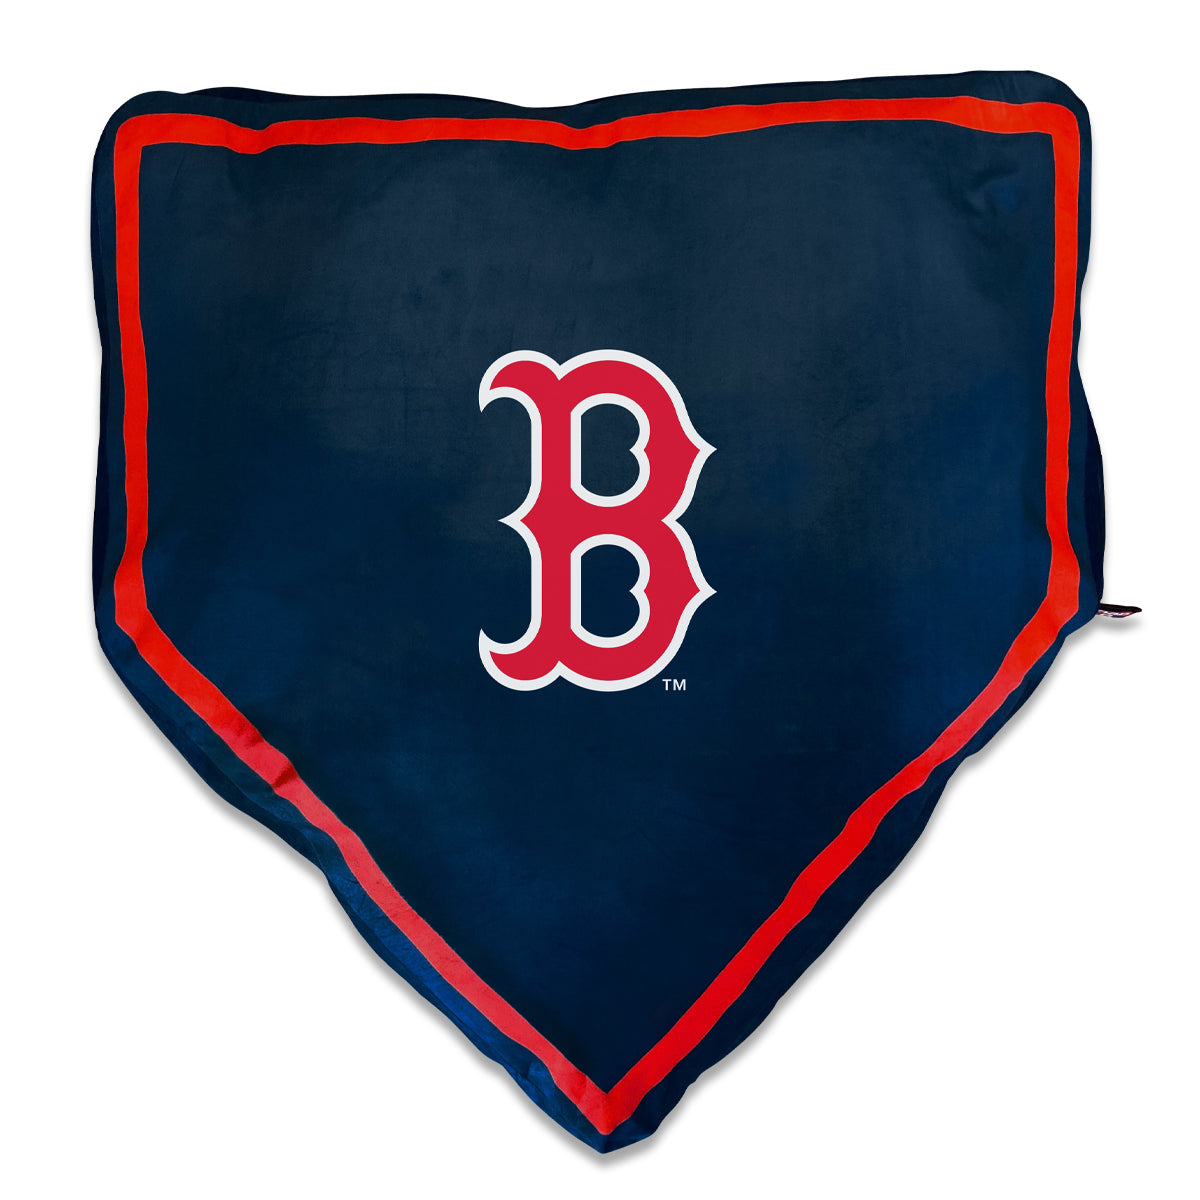 Boston Red Sox Home Plate Bed by Nap Cap